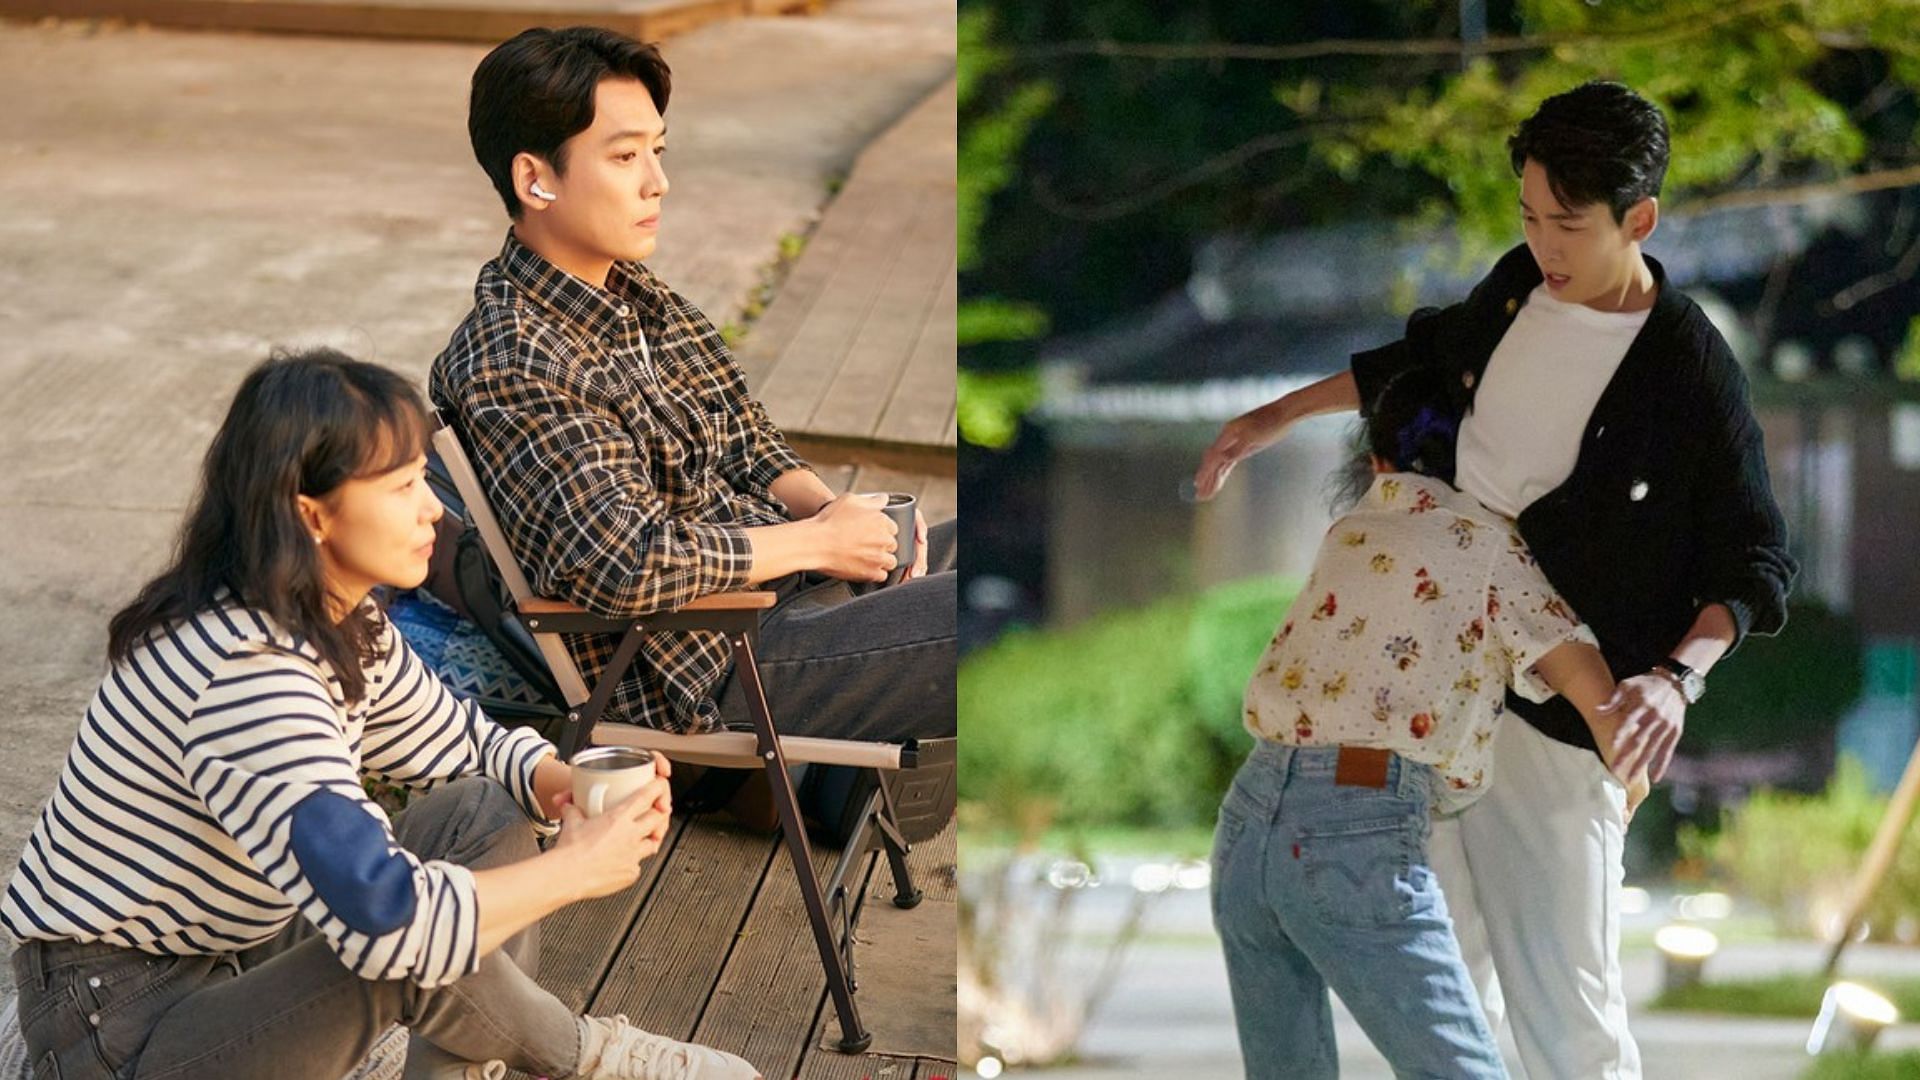 Crash Course in Romance has become K-drama lovers